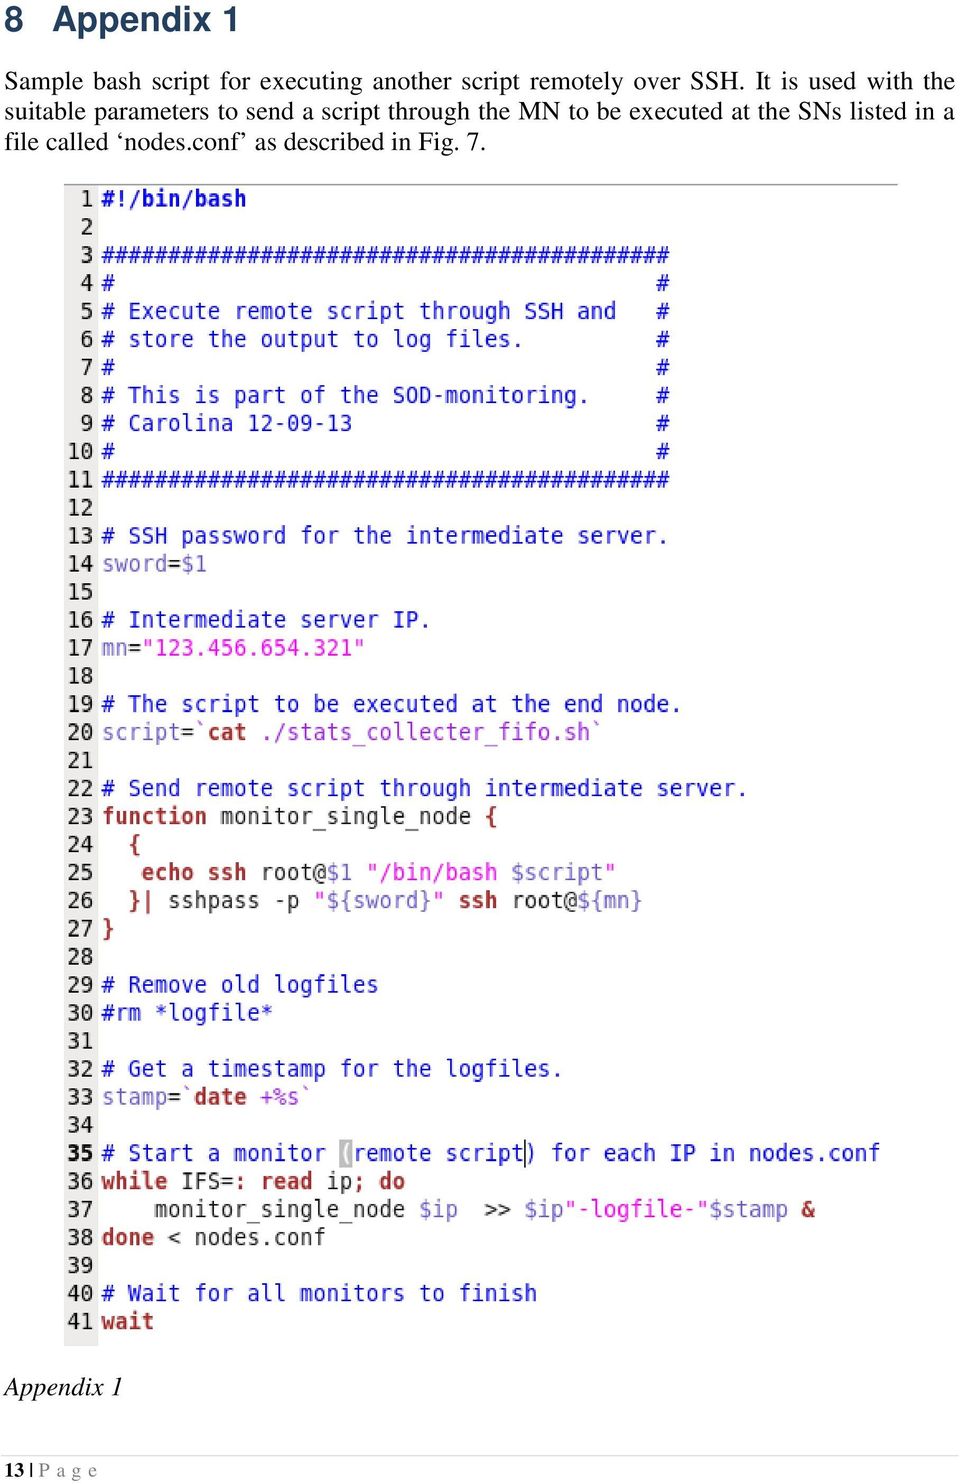 It is used with the suitable parameters to send a script